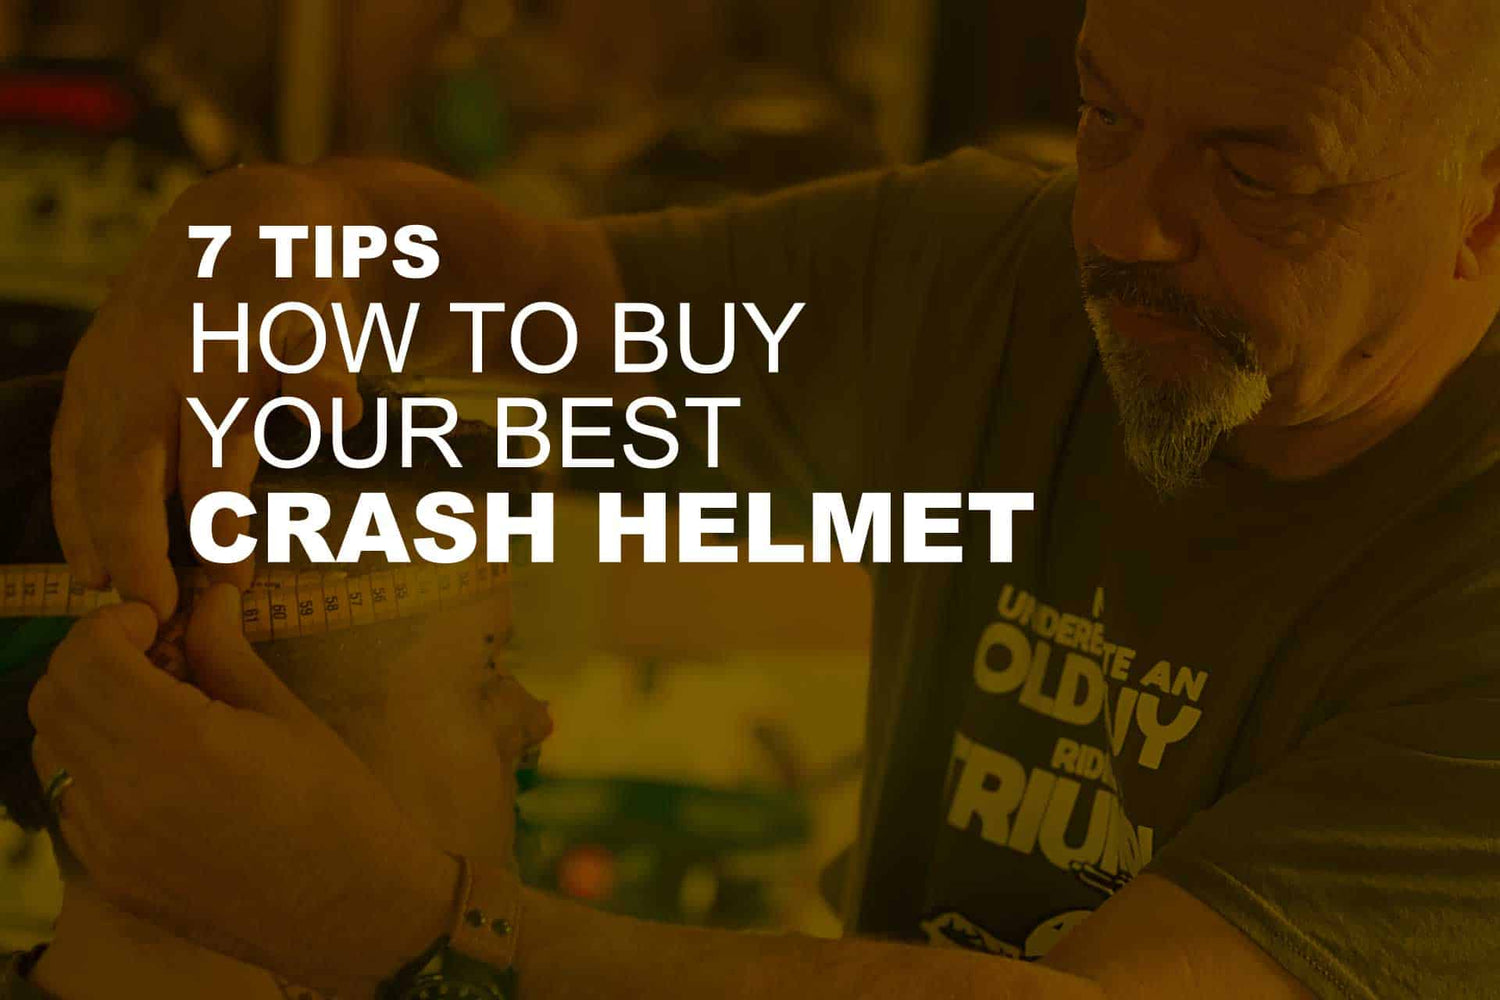 Motorcycle Helmets - Our 7 tips on how to buy your helmet & get it right first time